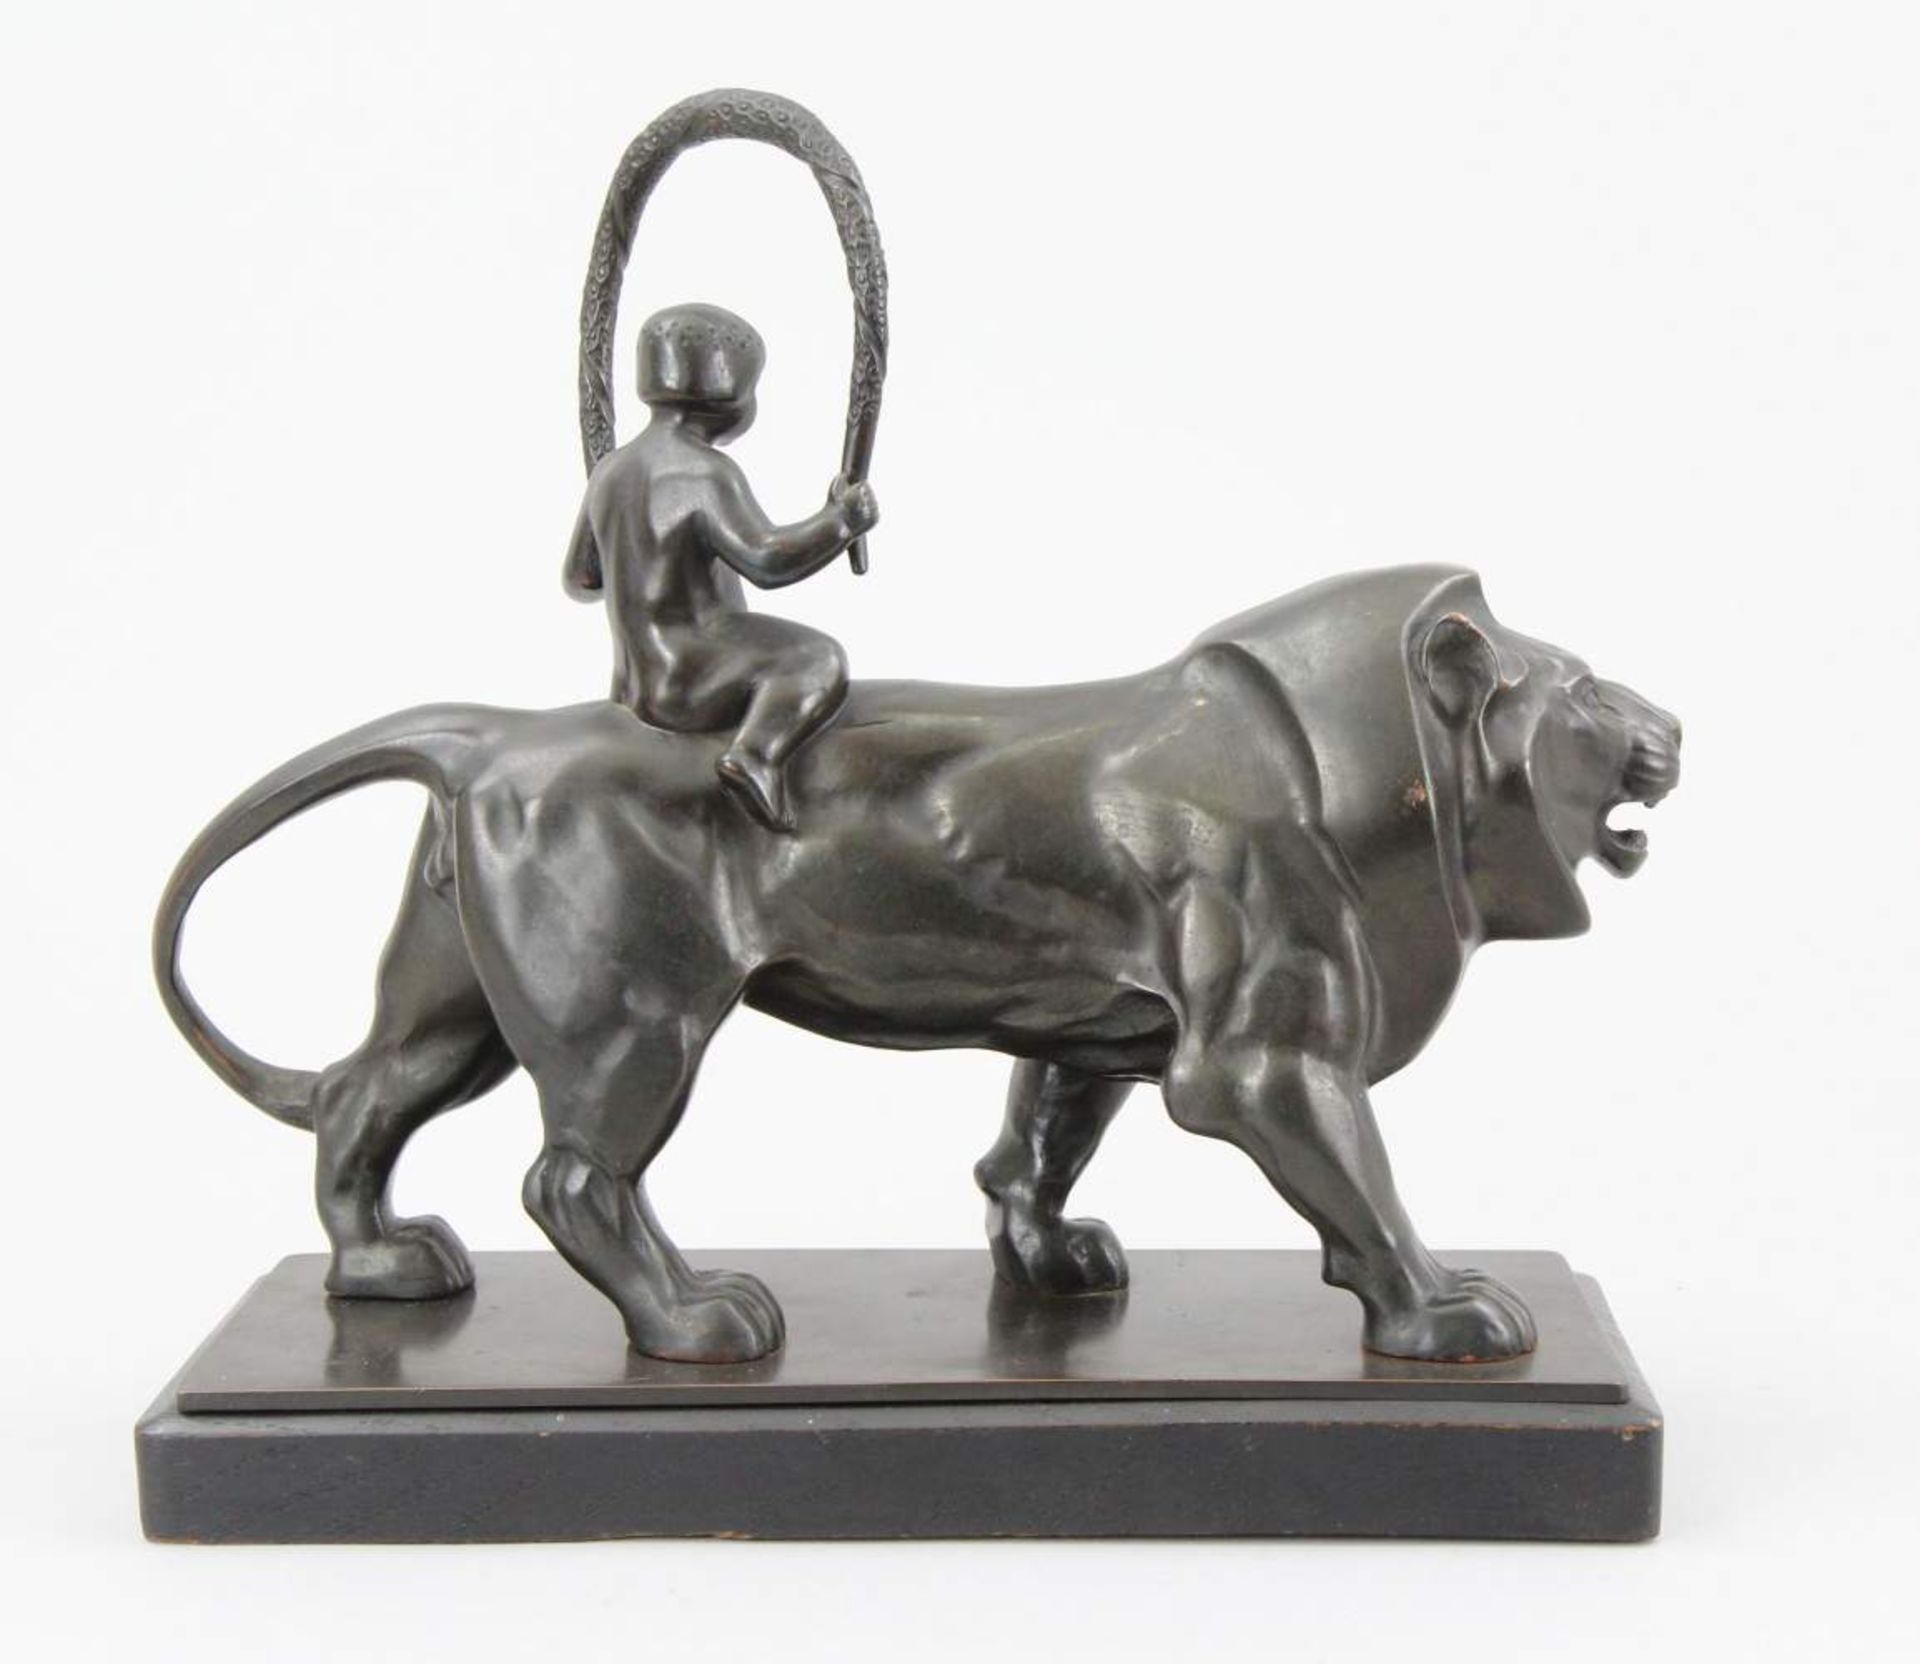 Germn early 20th century sculptor Figure, patinated bronze, naked boy riding a lion, original wooden - Image 3 of 3